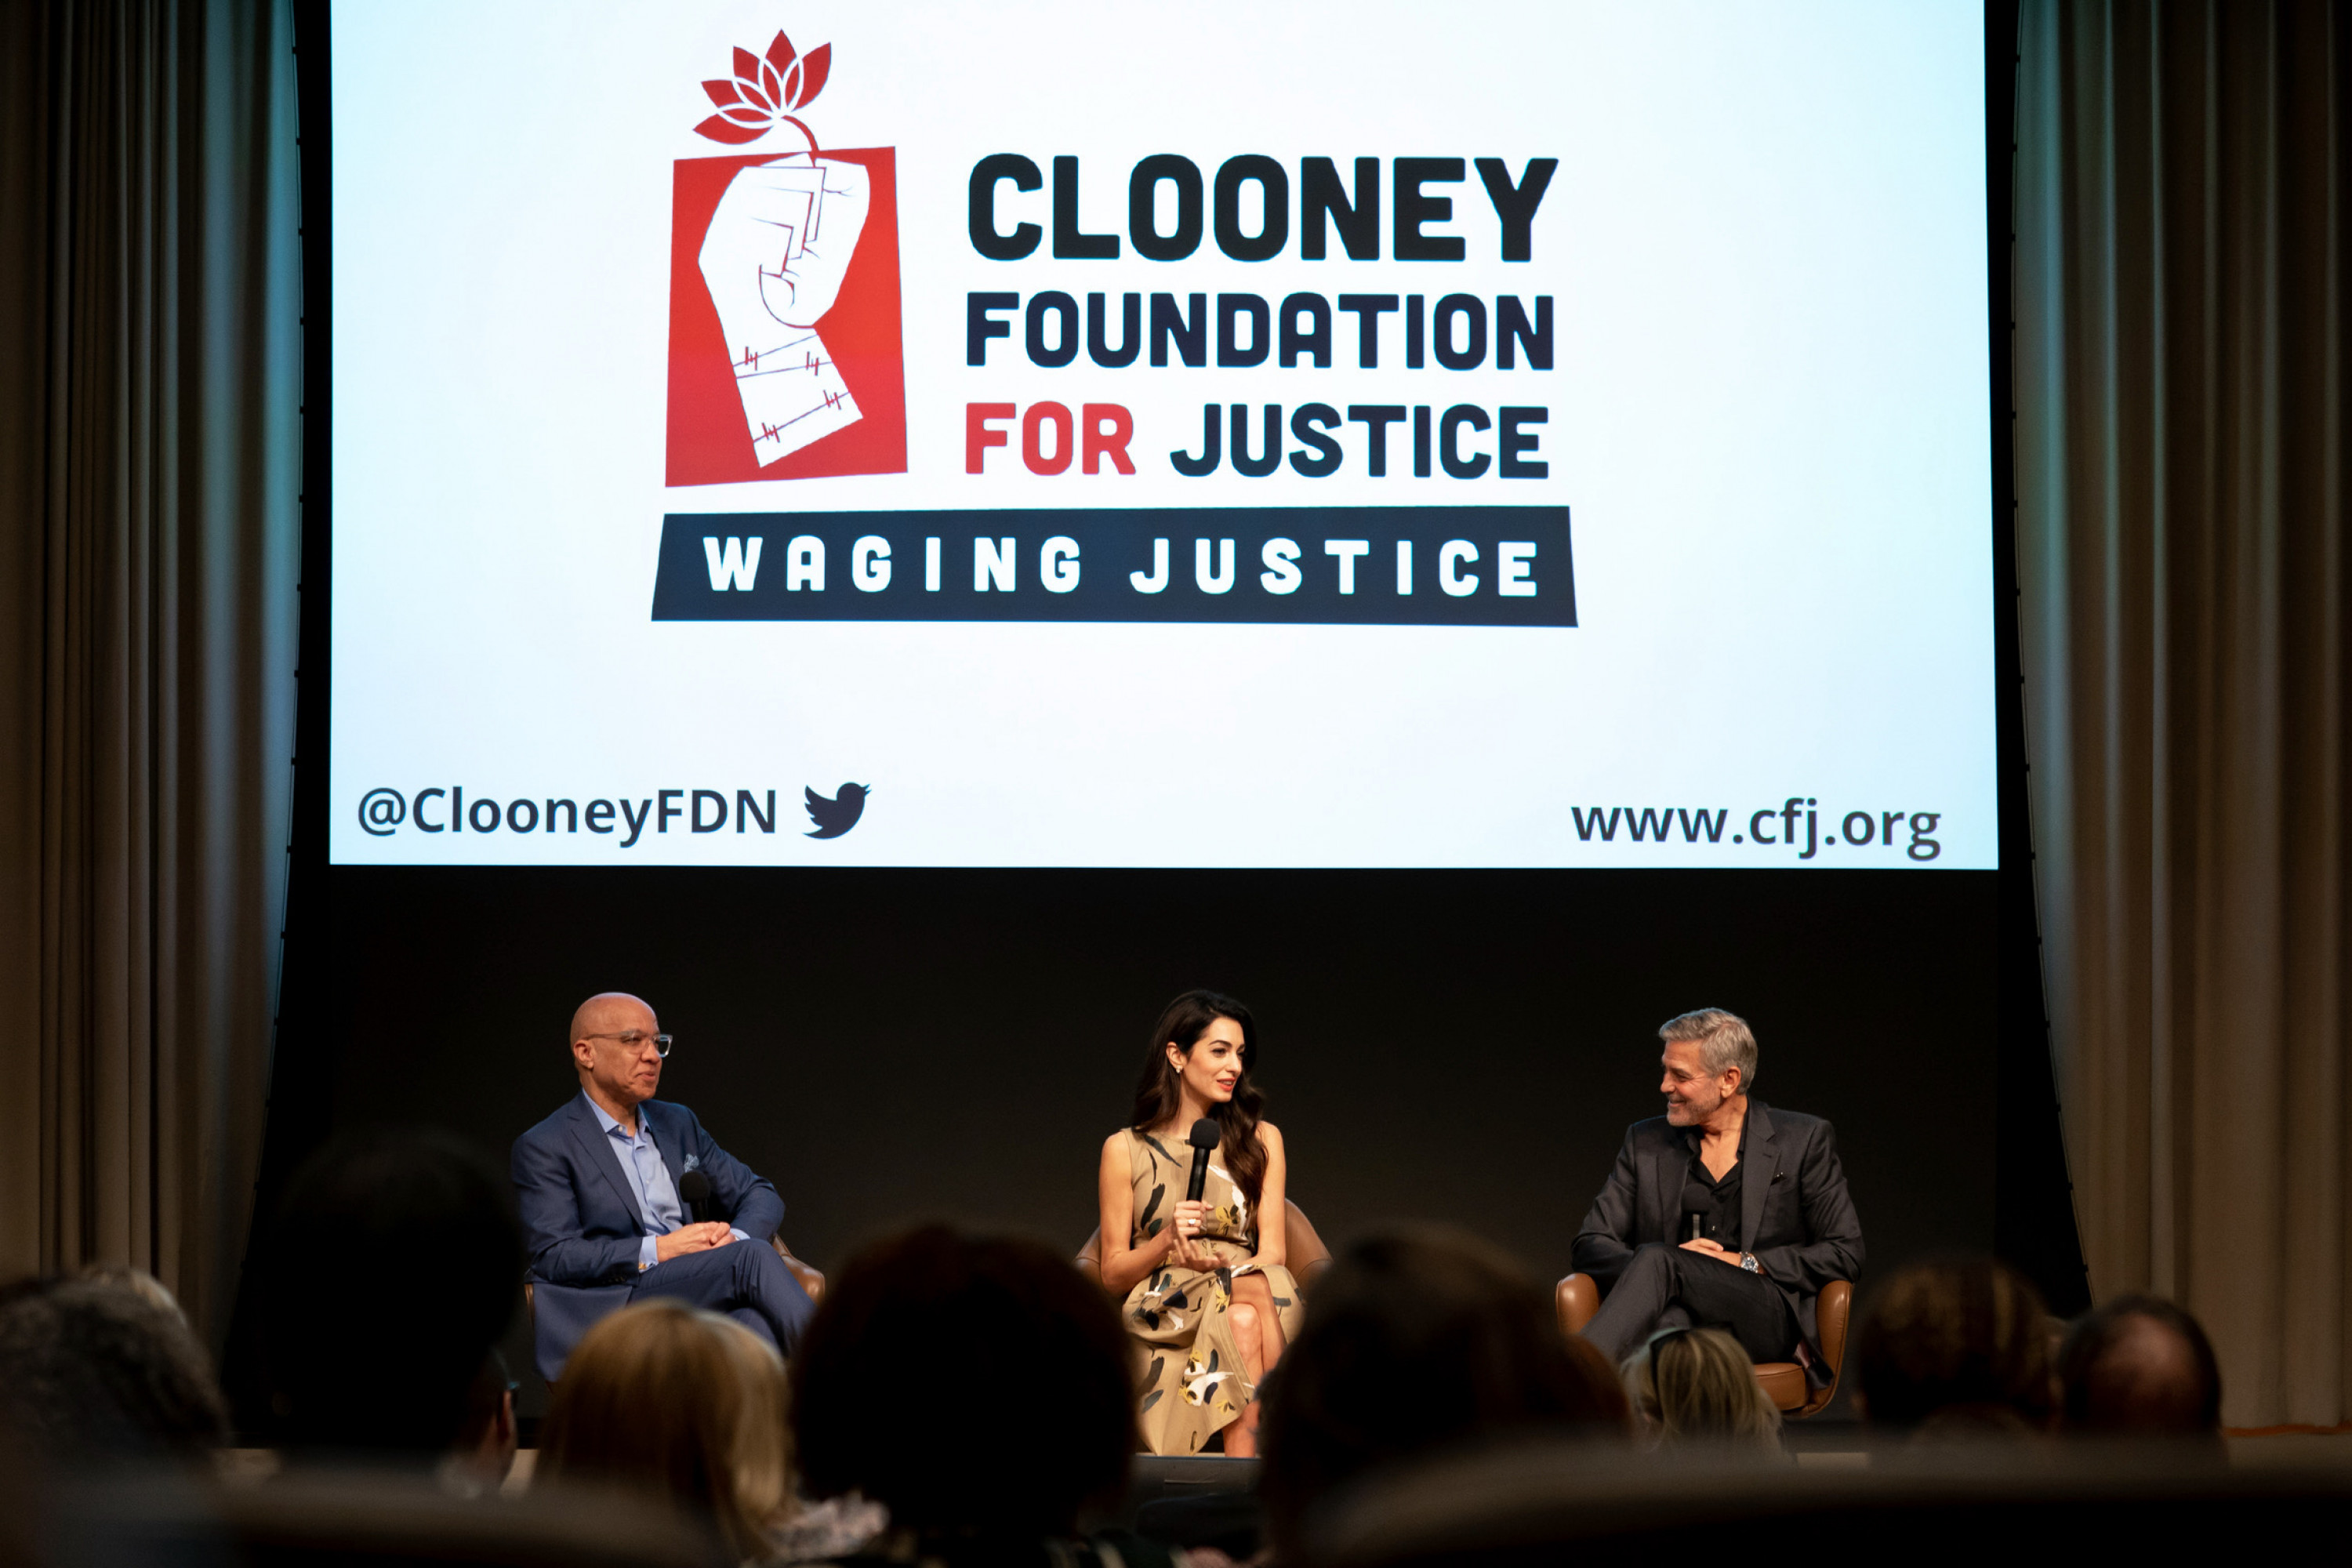 Darren Walker, President of the Ford Foundation, and Amal and George Clooney